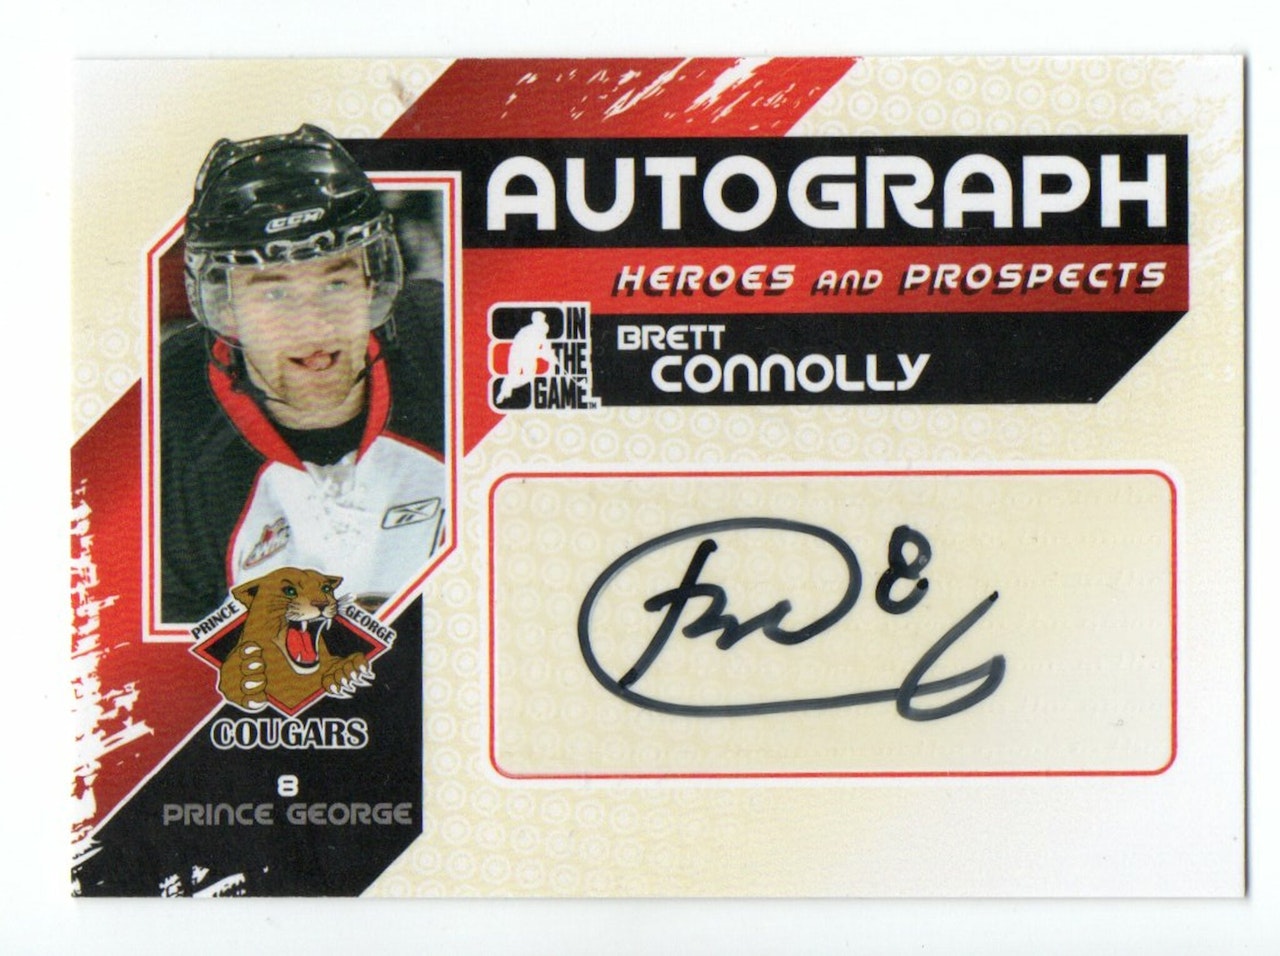 2010-11 ITG Heroes and Prospects Autographs #ABC Brett Connolly (40-189x5-LIGHTNING)